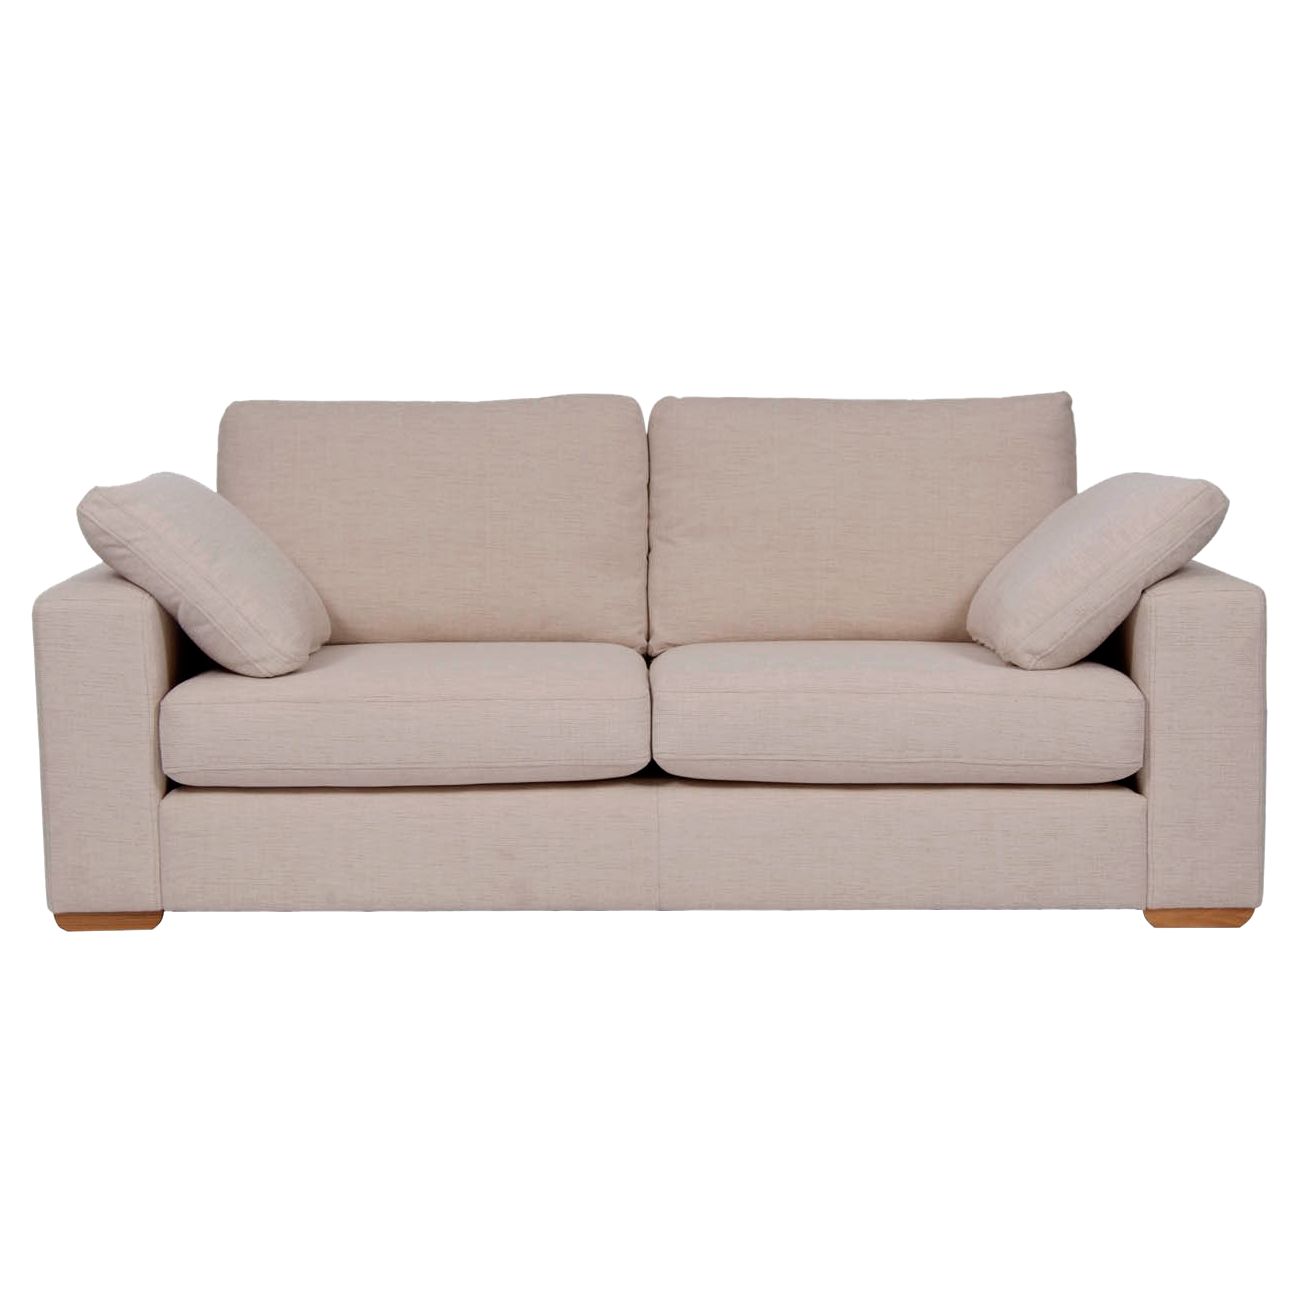 John Lewis Options Wide Arm Large Sofa, Model 12, Barnby Oyster at John Lewis